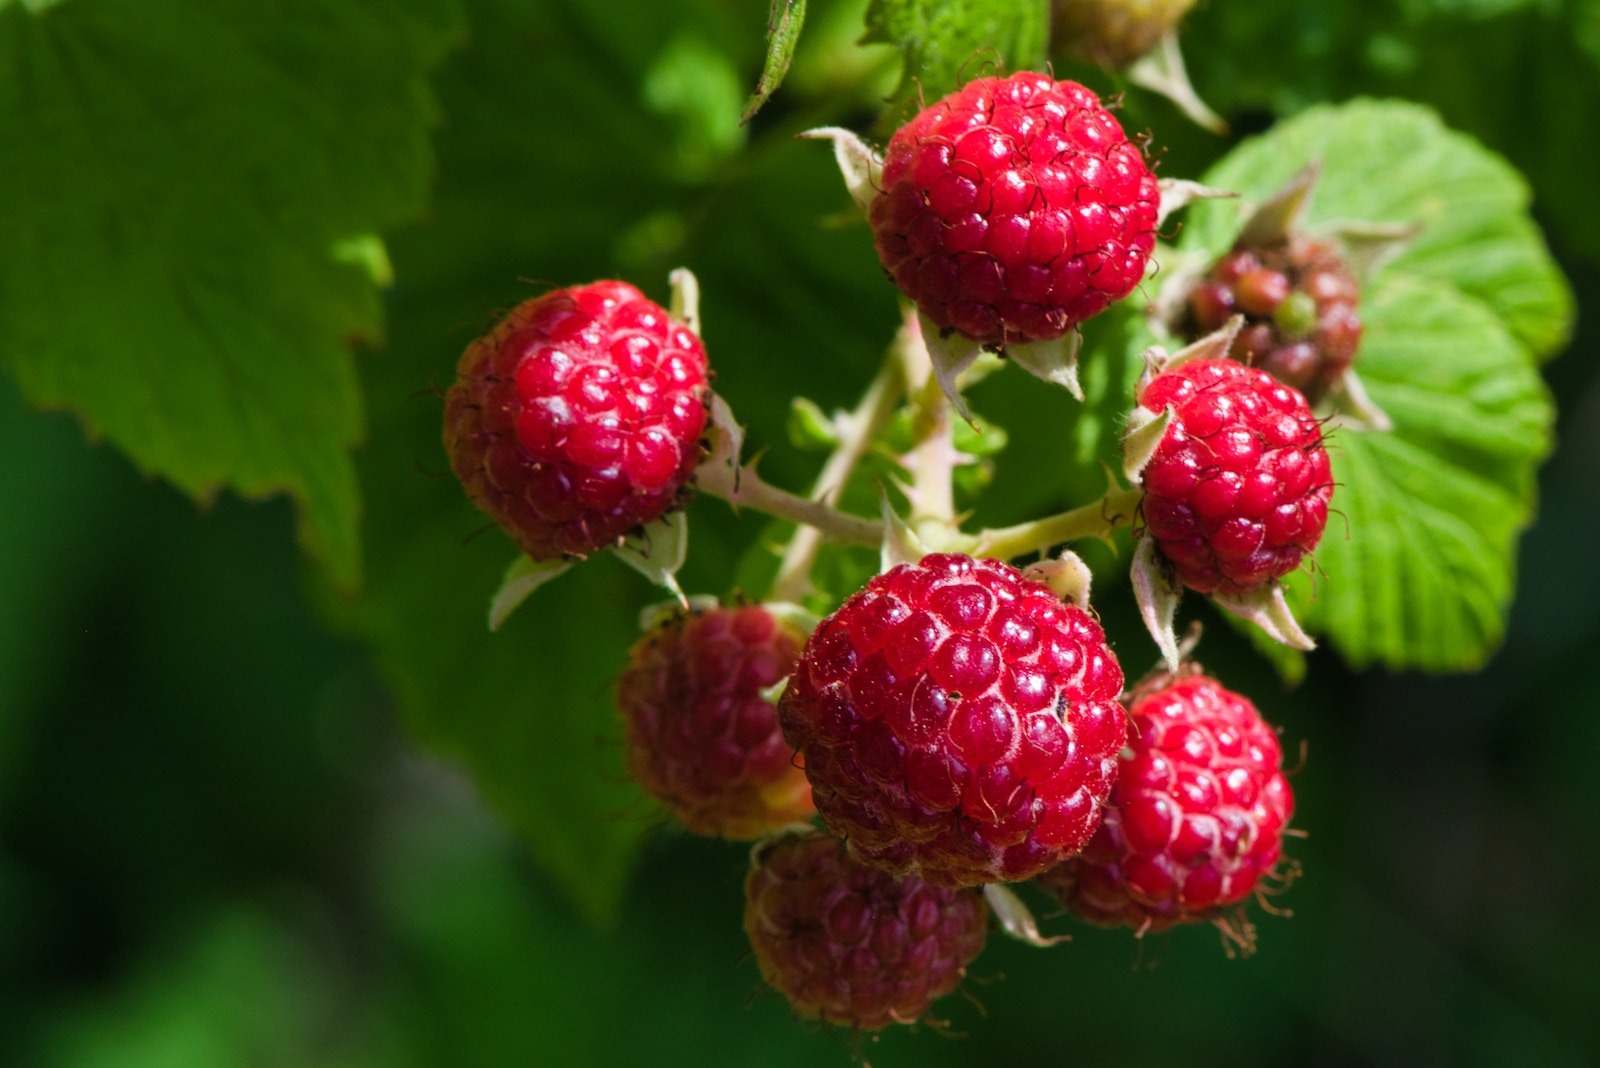 red raspberry fruit in close up photography